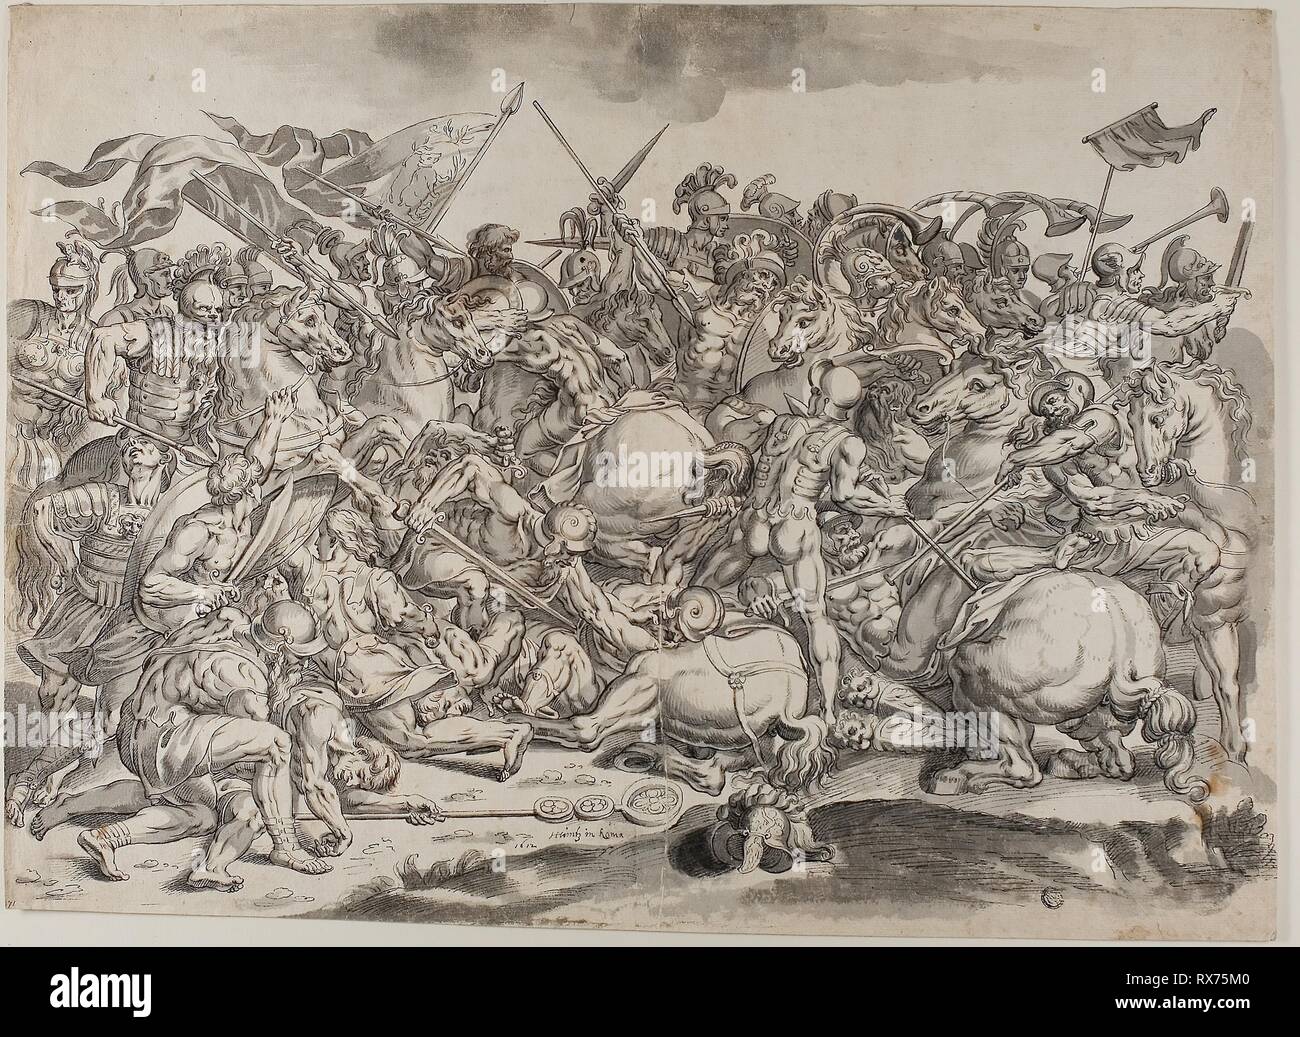 Battle of the Milvian Bridge. Johann Heintz (active Rome 1611-1612 and Milan 1652); after Raffaello Sanzio called Raphael and his workshop (Italian, 1483-1520). Date: 1612. Dimensions: 419 x 571 mm. Pen and black ink, and brush and gray wash over red chalk and traces of graphite, on cream laid paper, laid down on tan wove paper (pieced). Origin: Germany. Museum: The Chicago Art Institute. Stock Photo